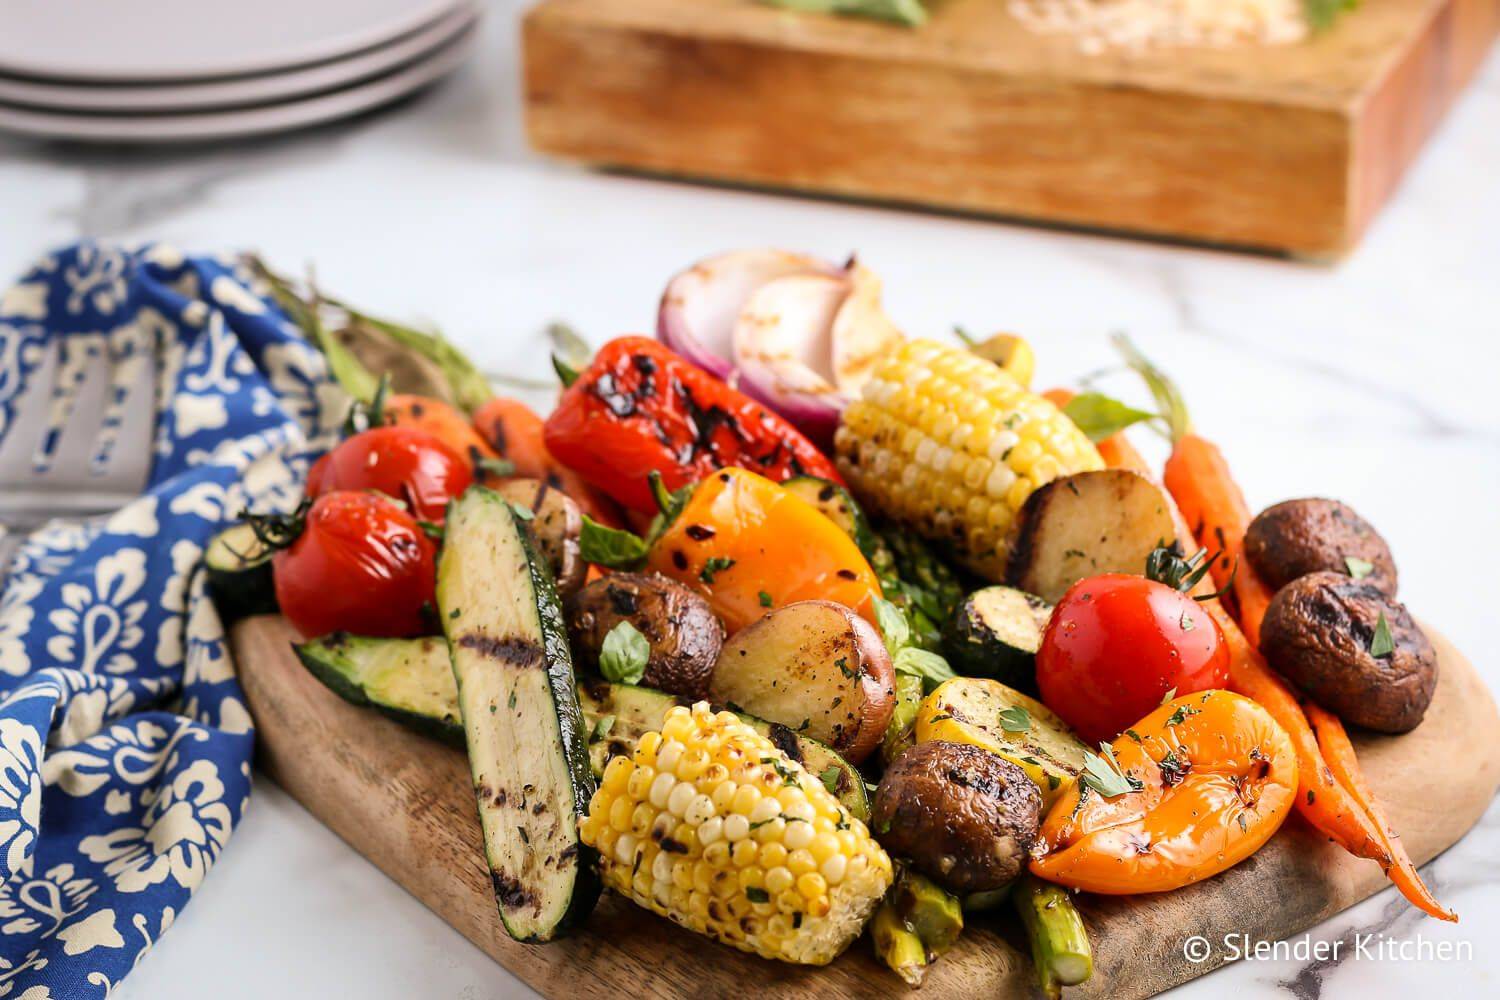 Grilled vegetables including corn, asparagus, tomatoes, onions, zucchini, carrots, and potatoes on a cutting board.